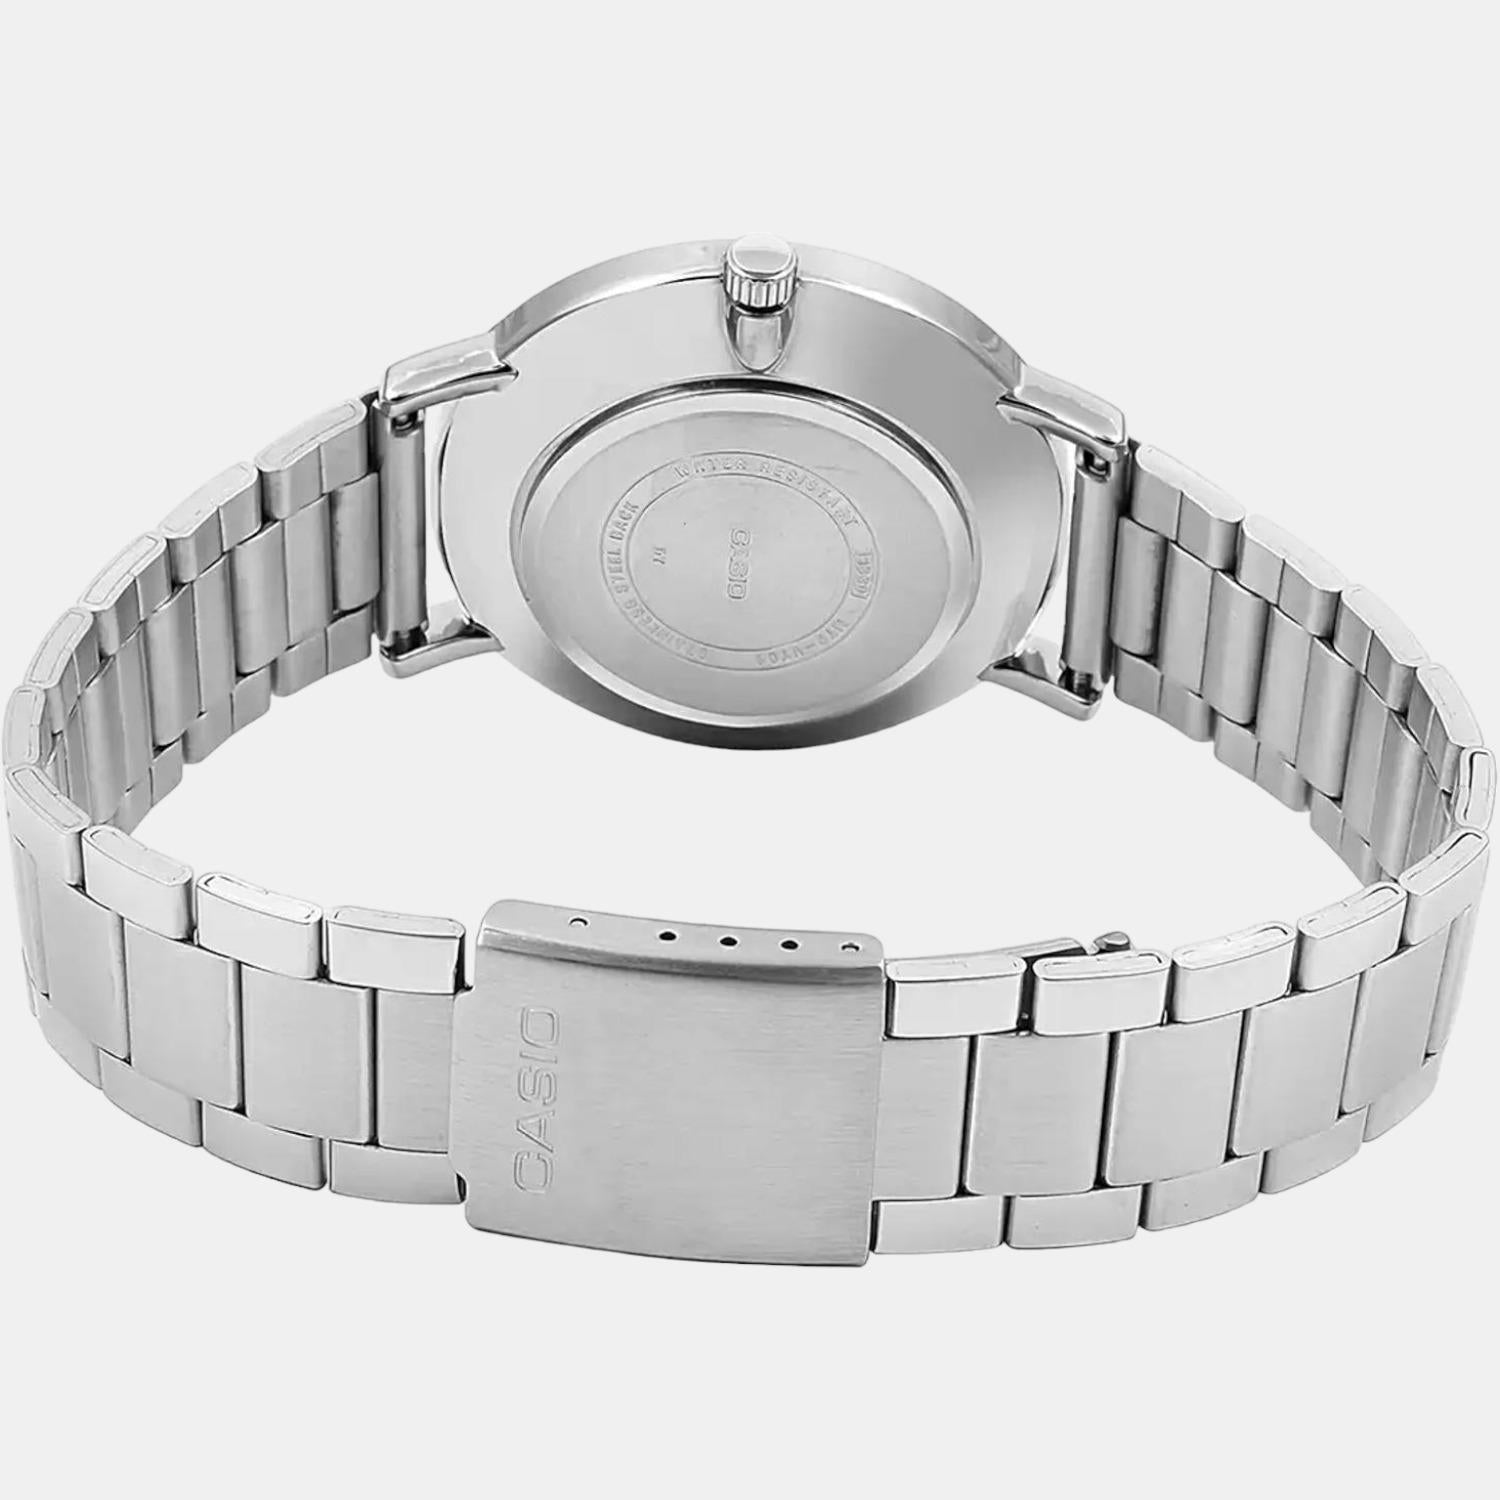 casio-stainless-steel-silver-analog-men-watch-a1614